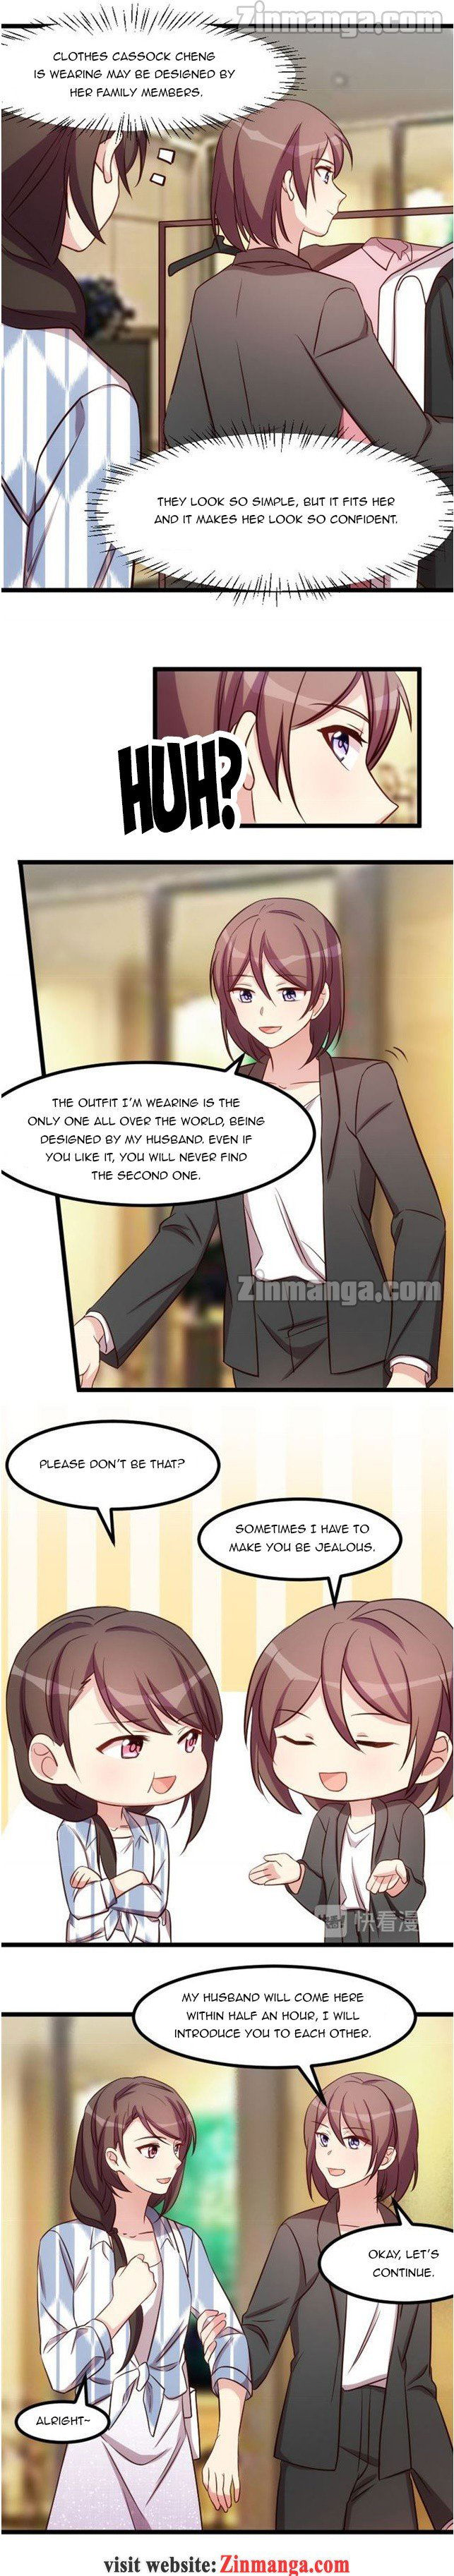 CEO's Sudden Proposal Chapter 203 page 3